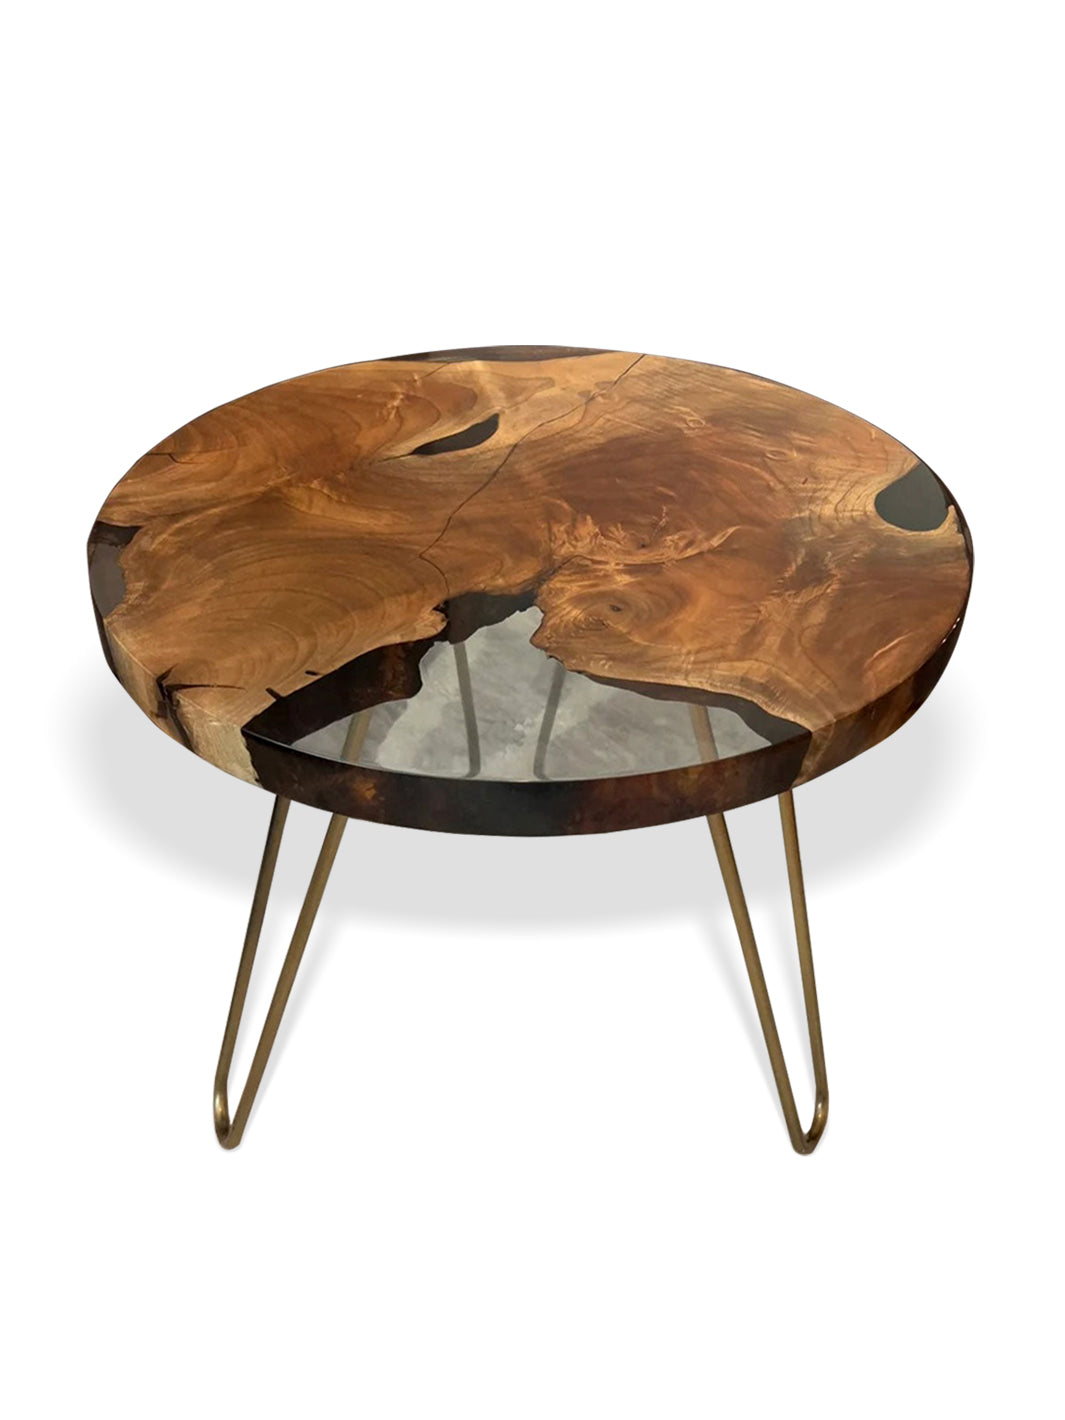 Walnut Clear Epoxy Resin Rounded Live Edge Coffee Table 23.5"